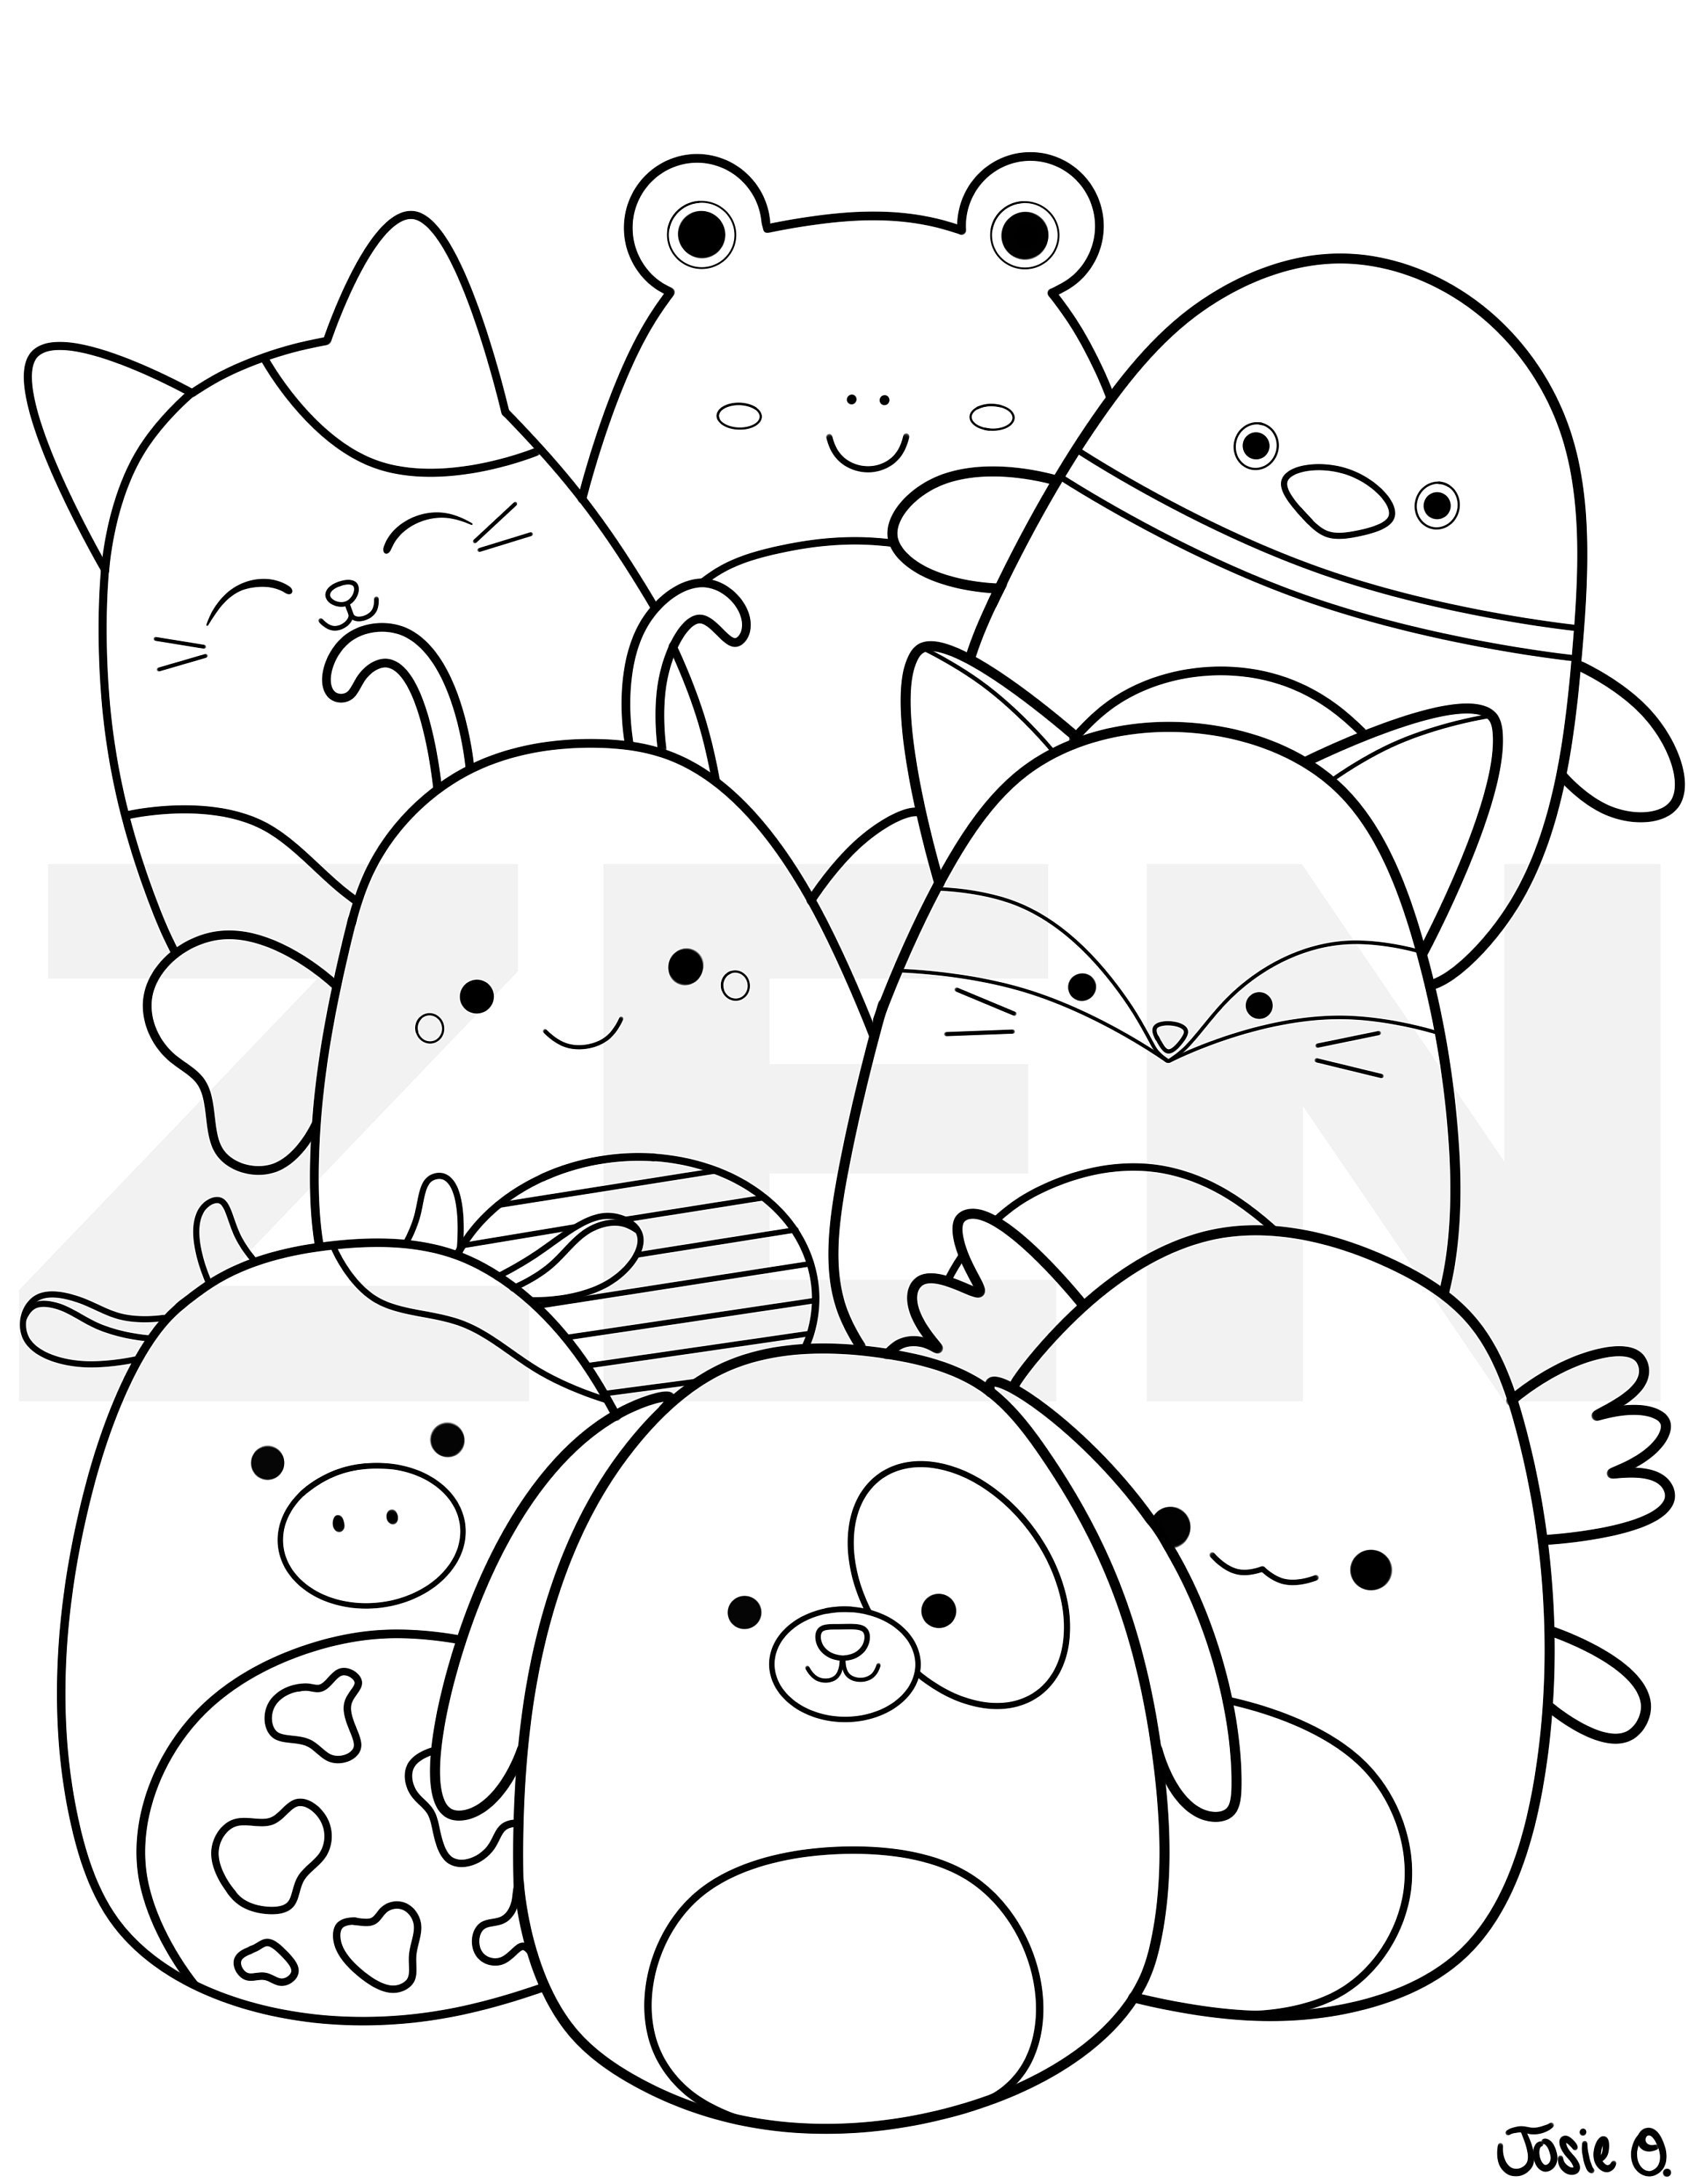 Squishmallow Coloring Page Printable Squishmallow Coloring   Etsy